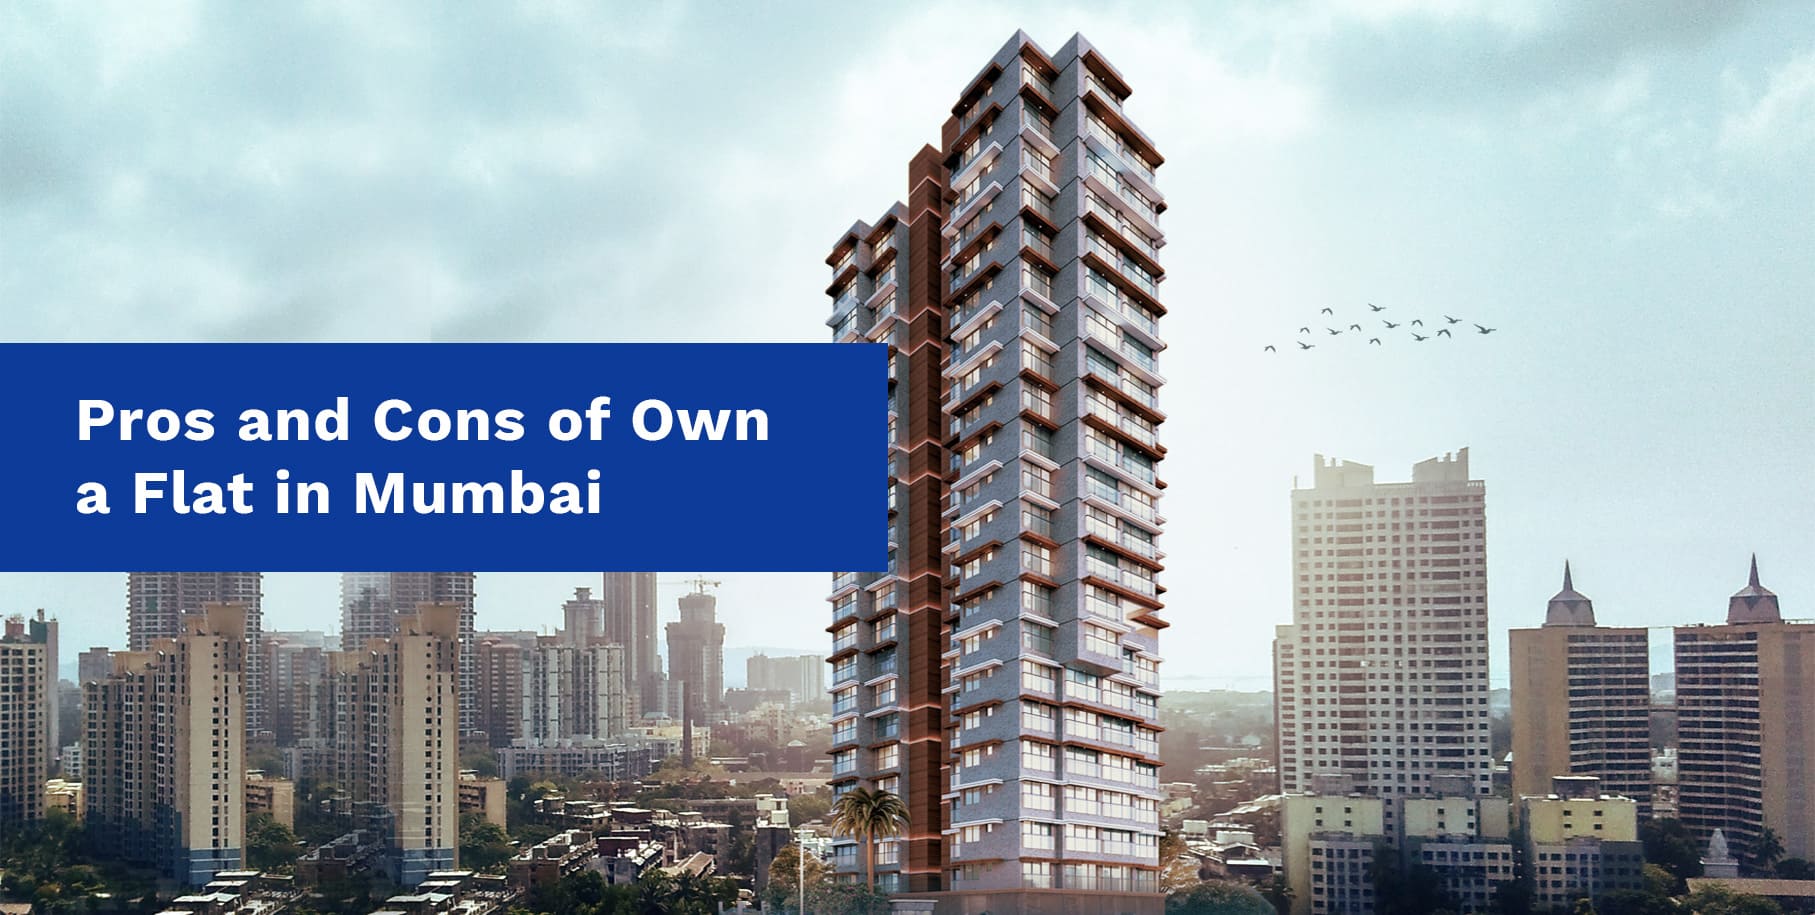 Pros and Cons of Own a Flat in Mumbai